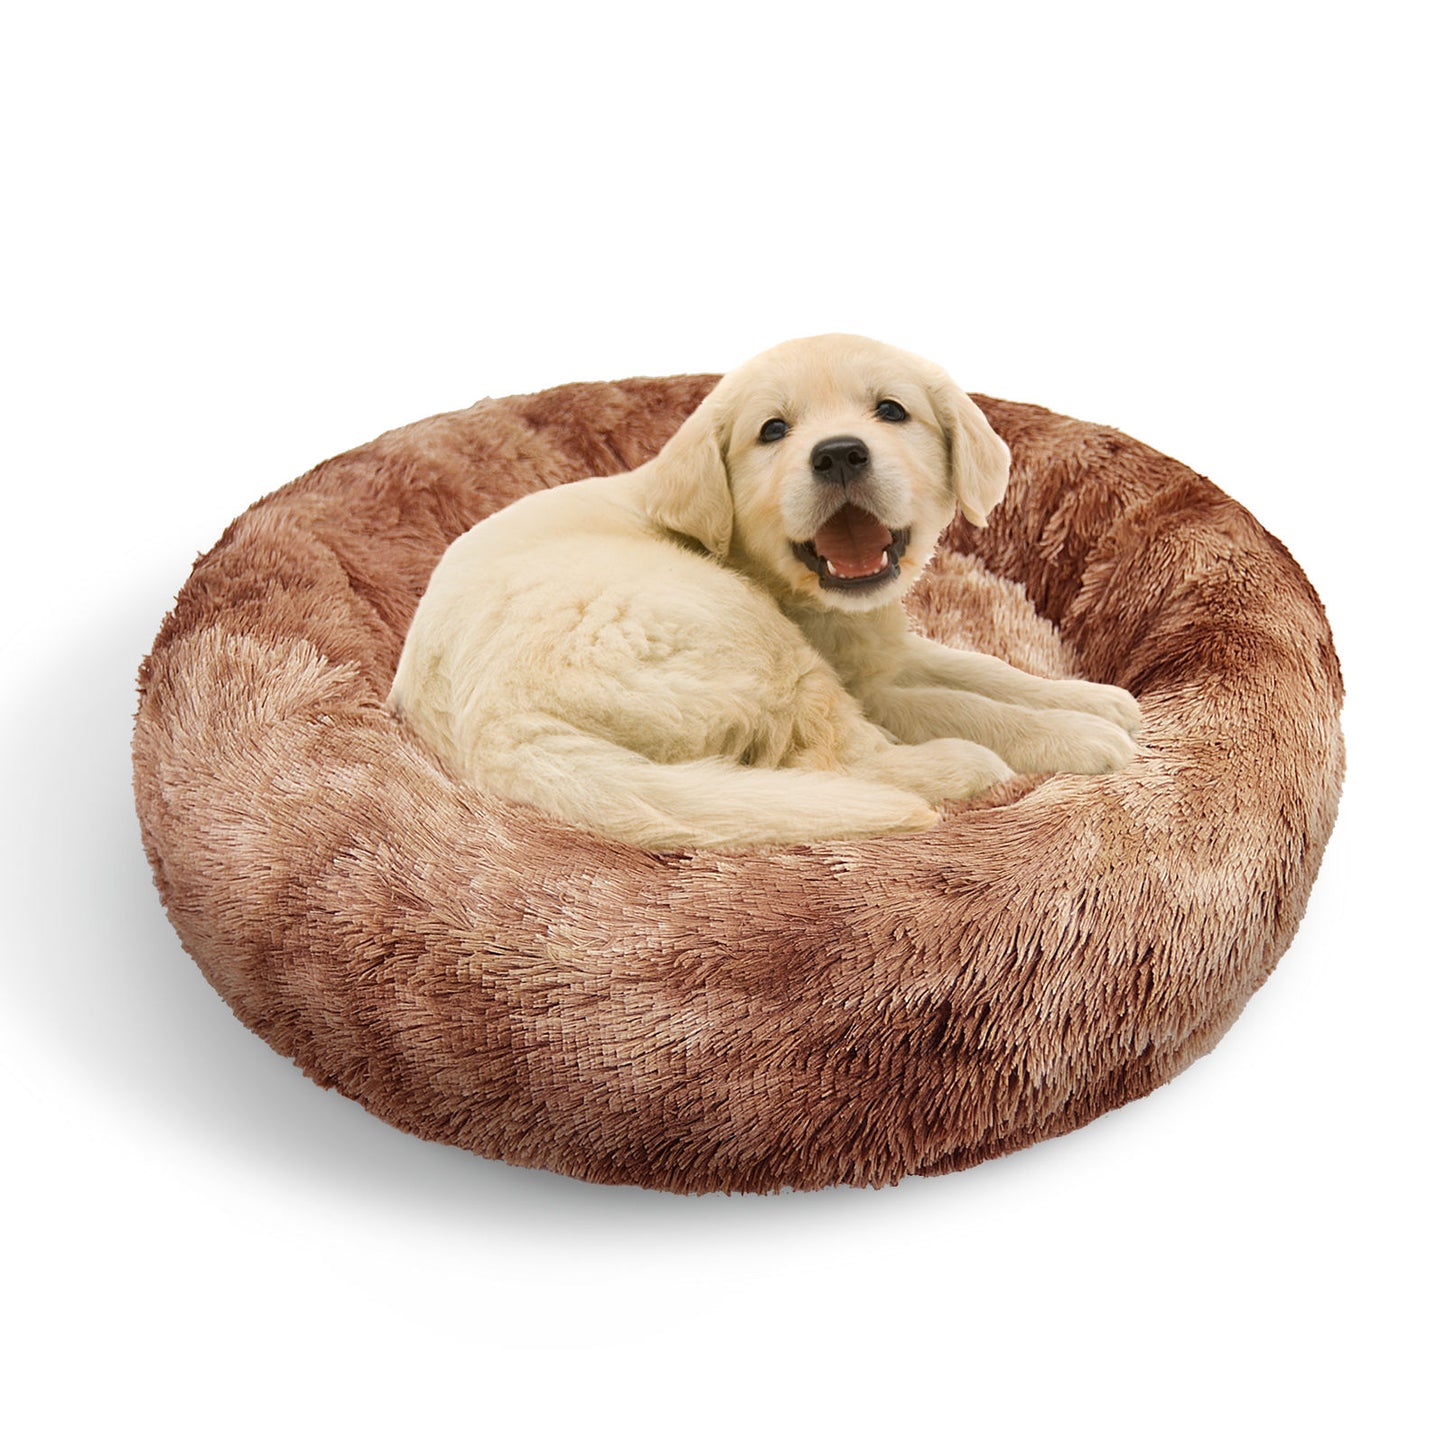 Pawfriends Dog Cat Pet Calming Bed Warm Soft Plush Round Nest Comfy Sleeping Kennel Cave 70